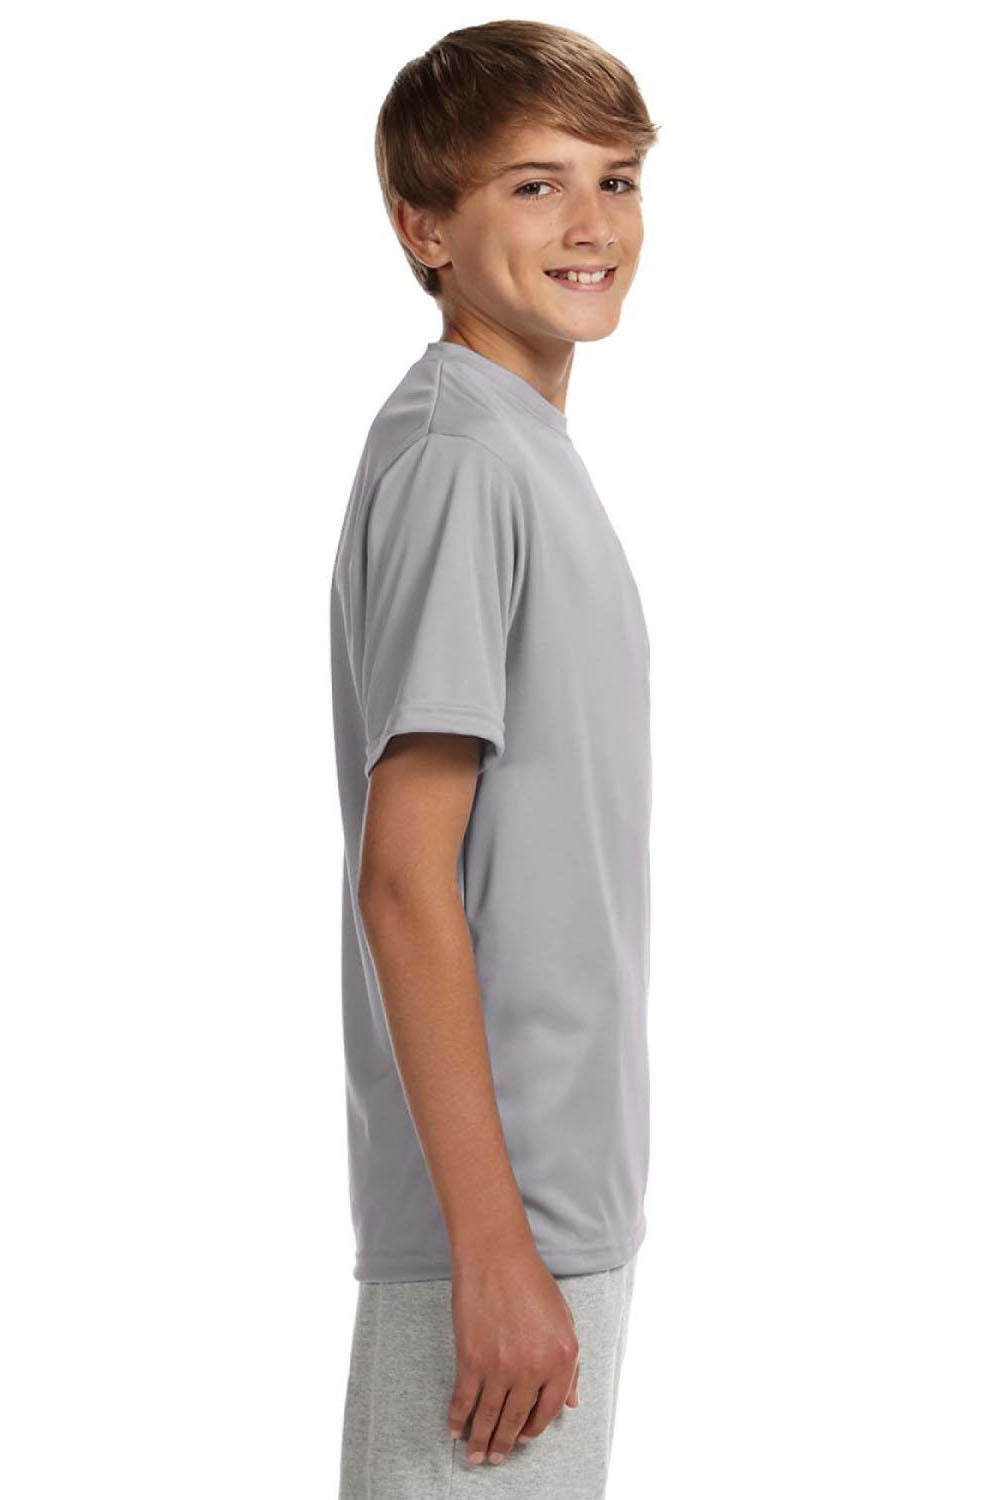 A4 NB3142 Youth Performance Moisture Wicking Short Sleeve Crewneck T-Shirt Silver Grey Model Side